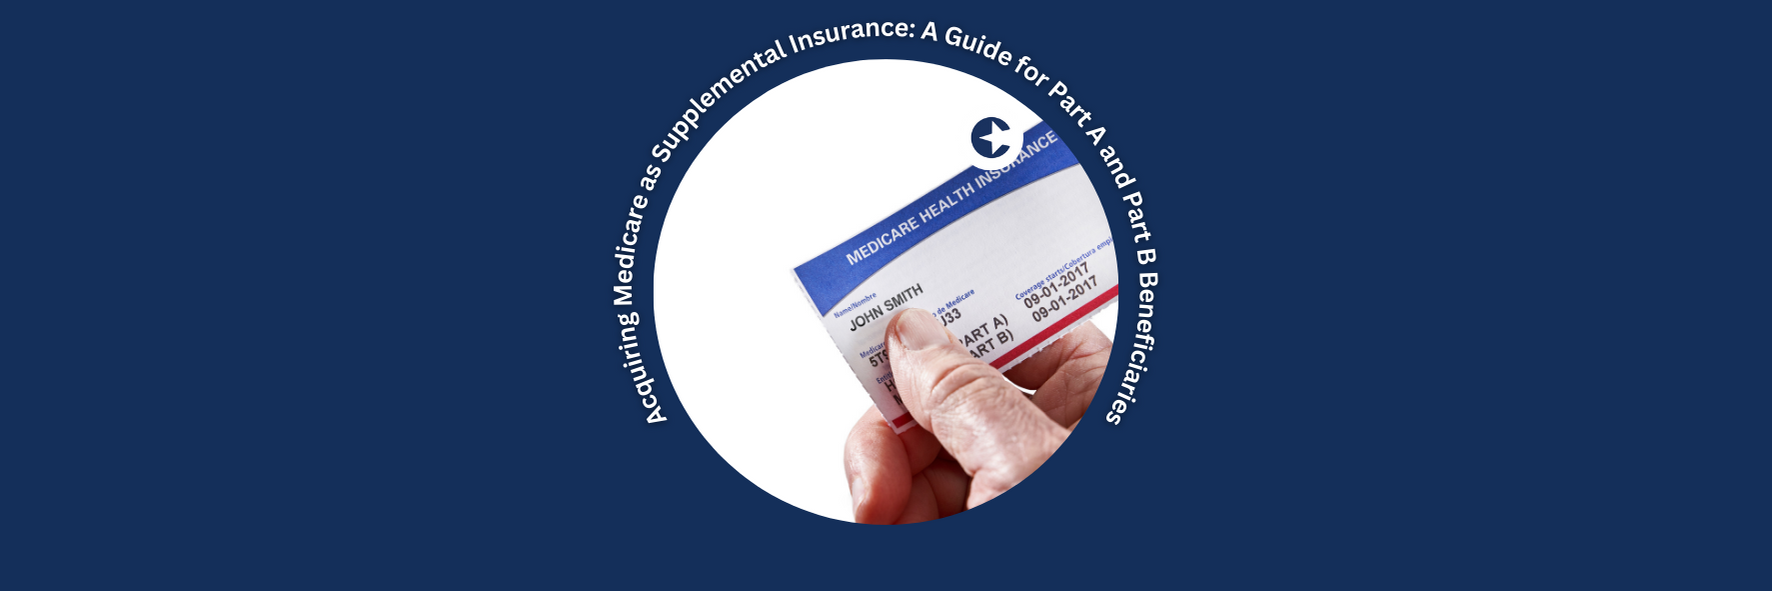 Acquiring Medicare as Supplemental Insurance: A Guide for Part A and Part B Beneficiaries